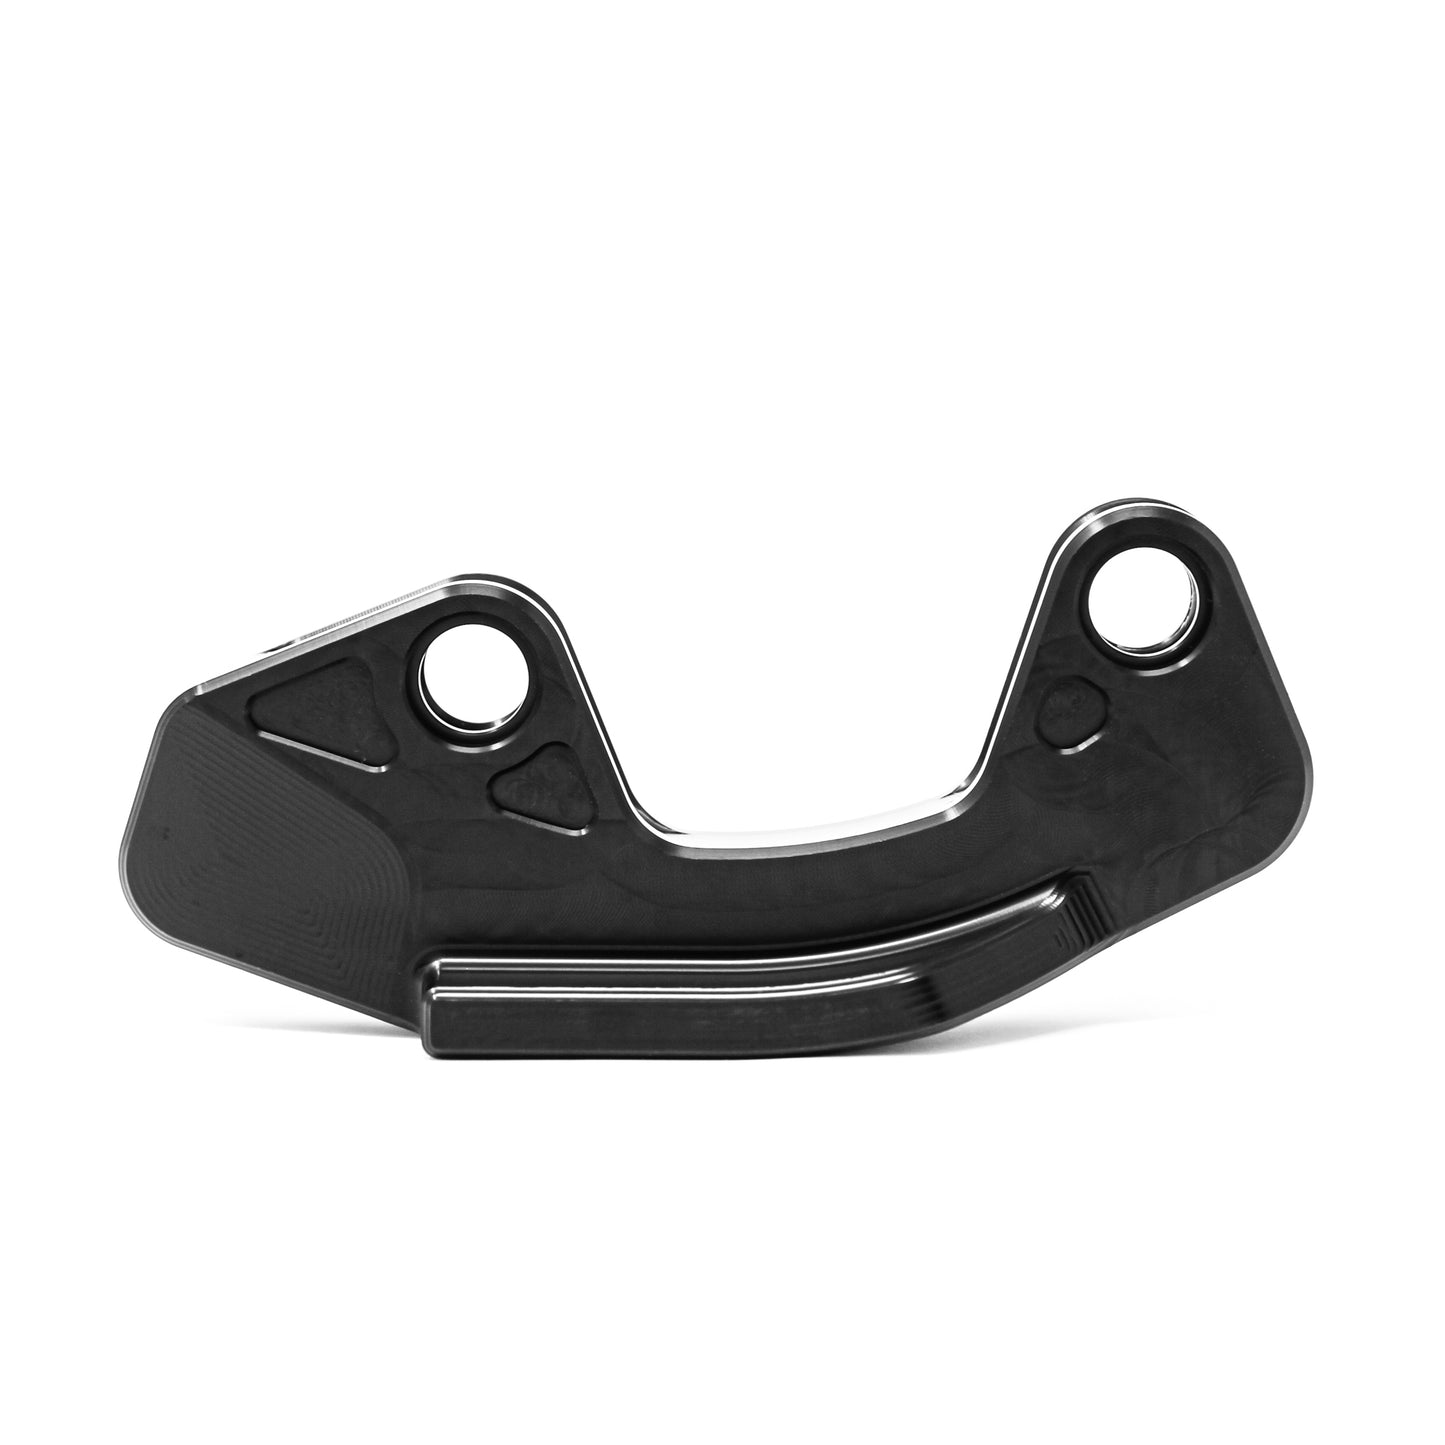 ISCG 05 Spare Lower Guide Bash Plastic 32 Tooth